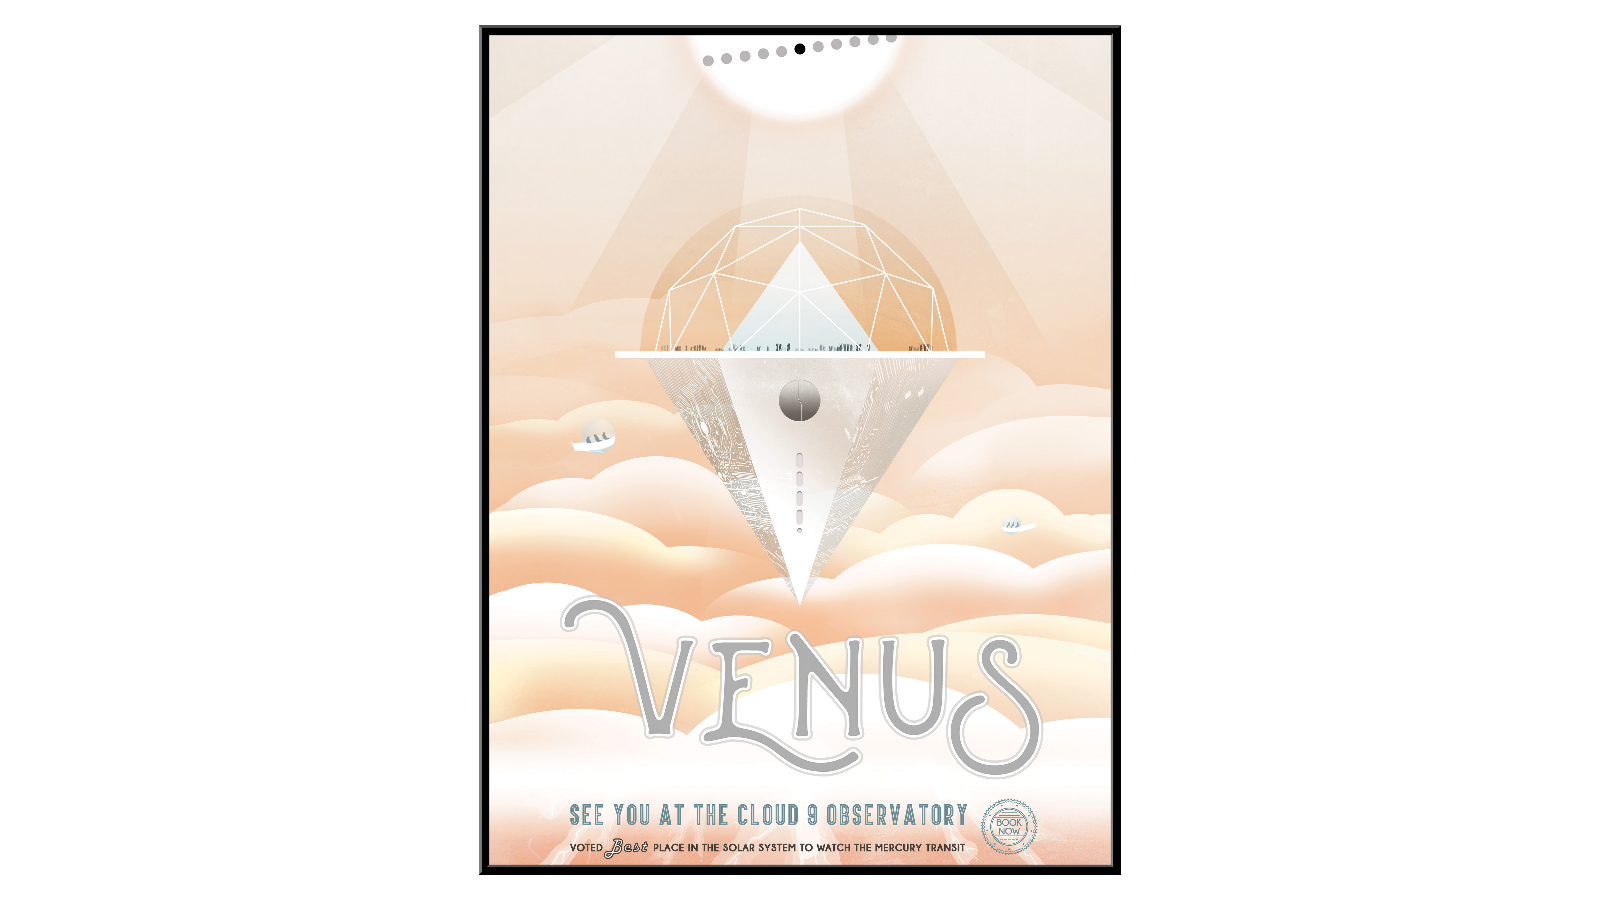 Venus - See you at the cloud 9 observatory